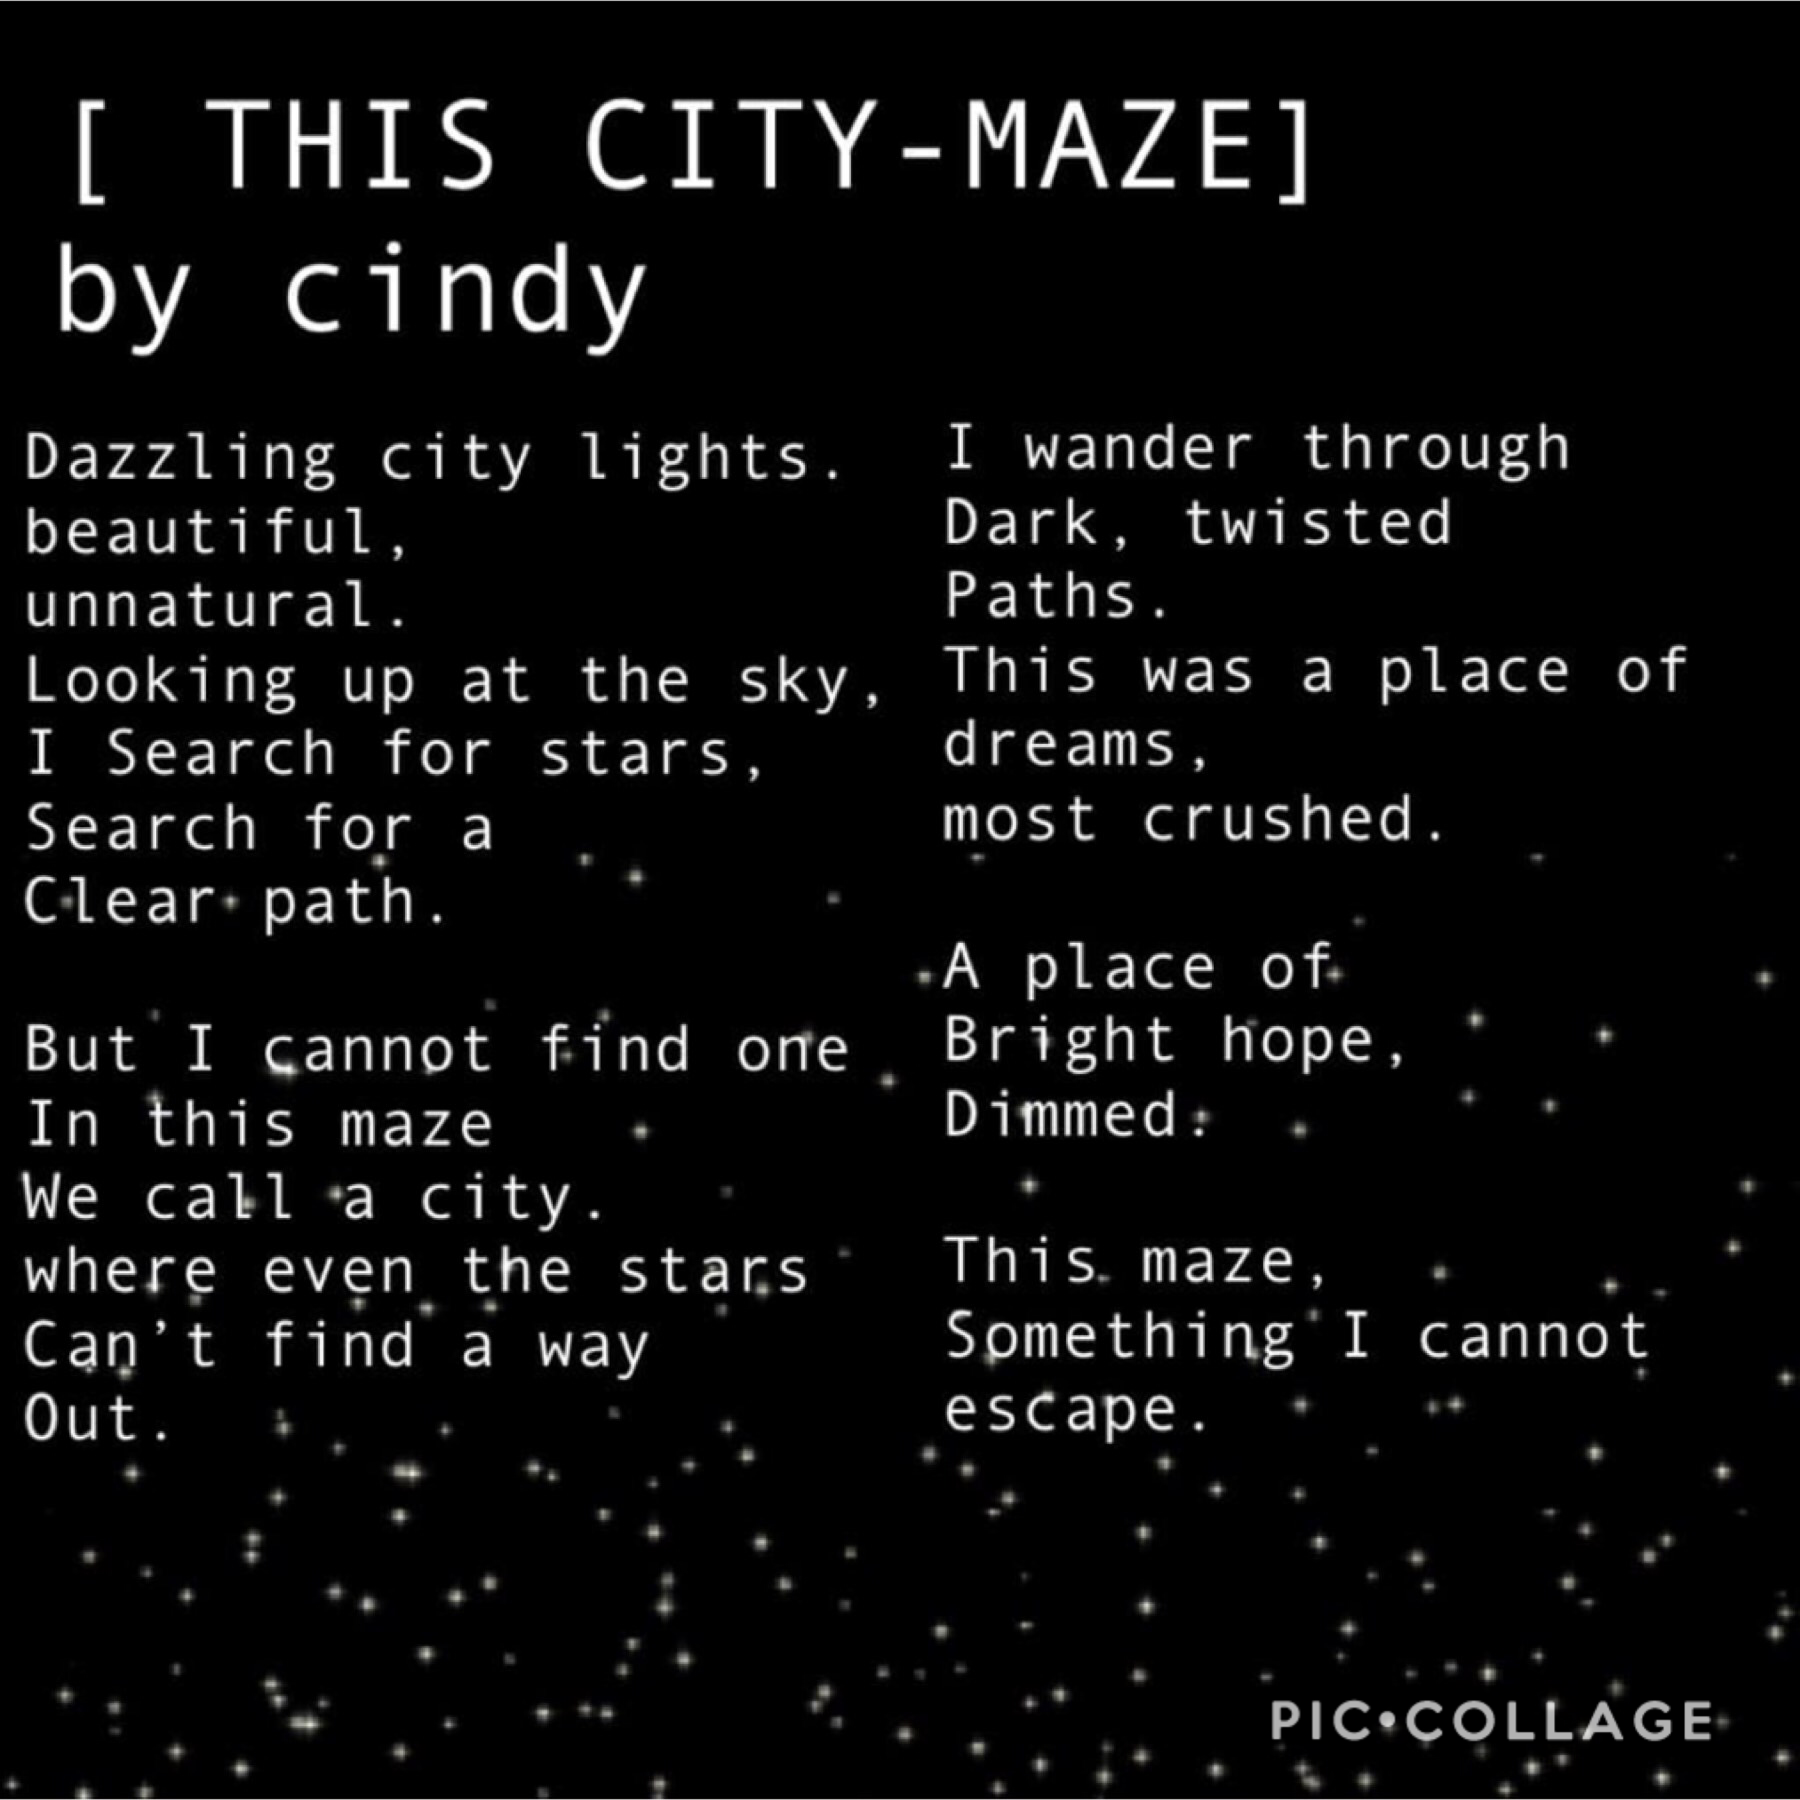 My entry to GemQuote’s writing competition! This seems dark but after much thought, it is genuinely what I think of a city, looking past all its glory. What Do you all think?? Please tell me in the comments! :D